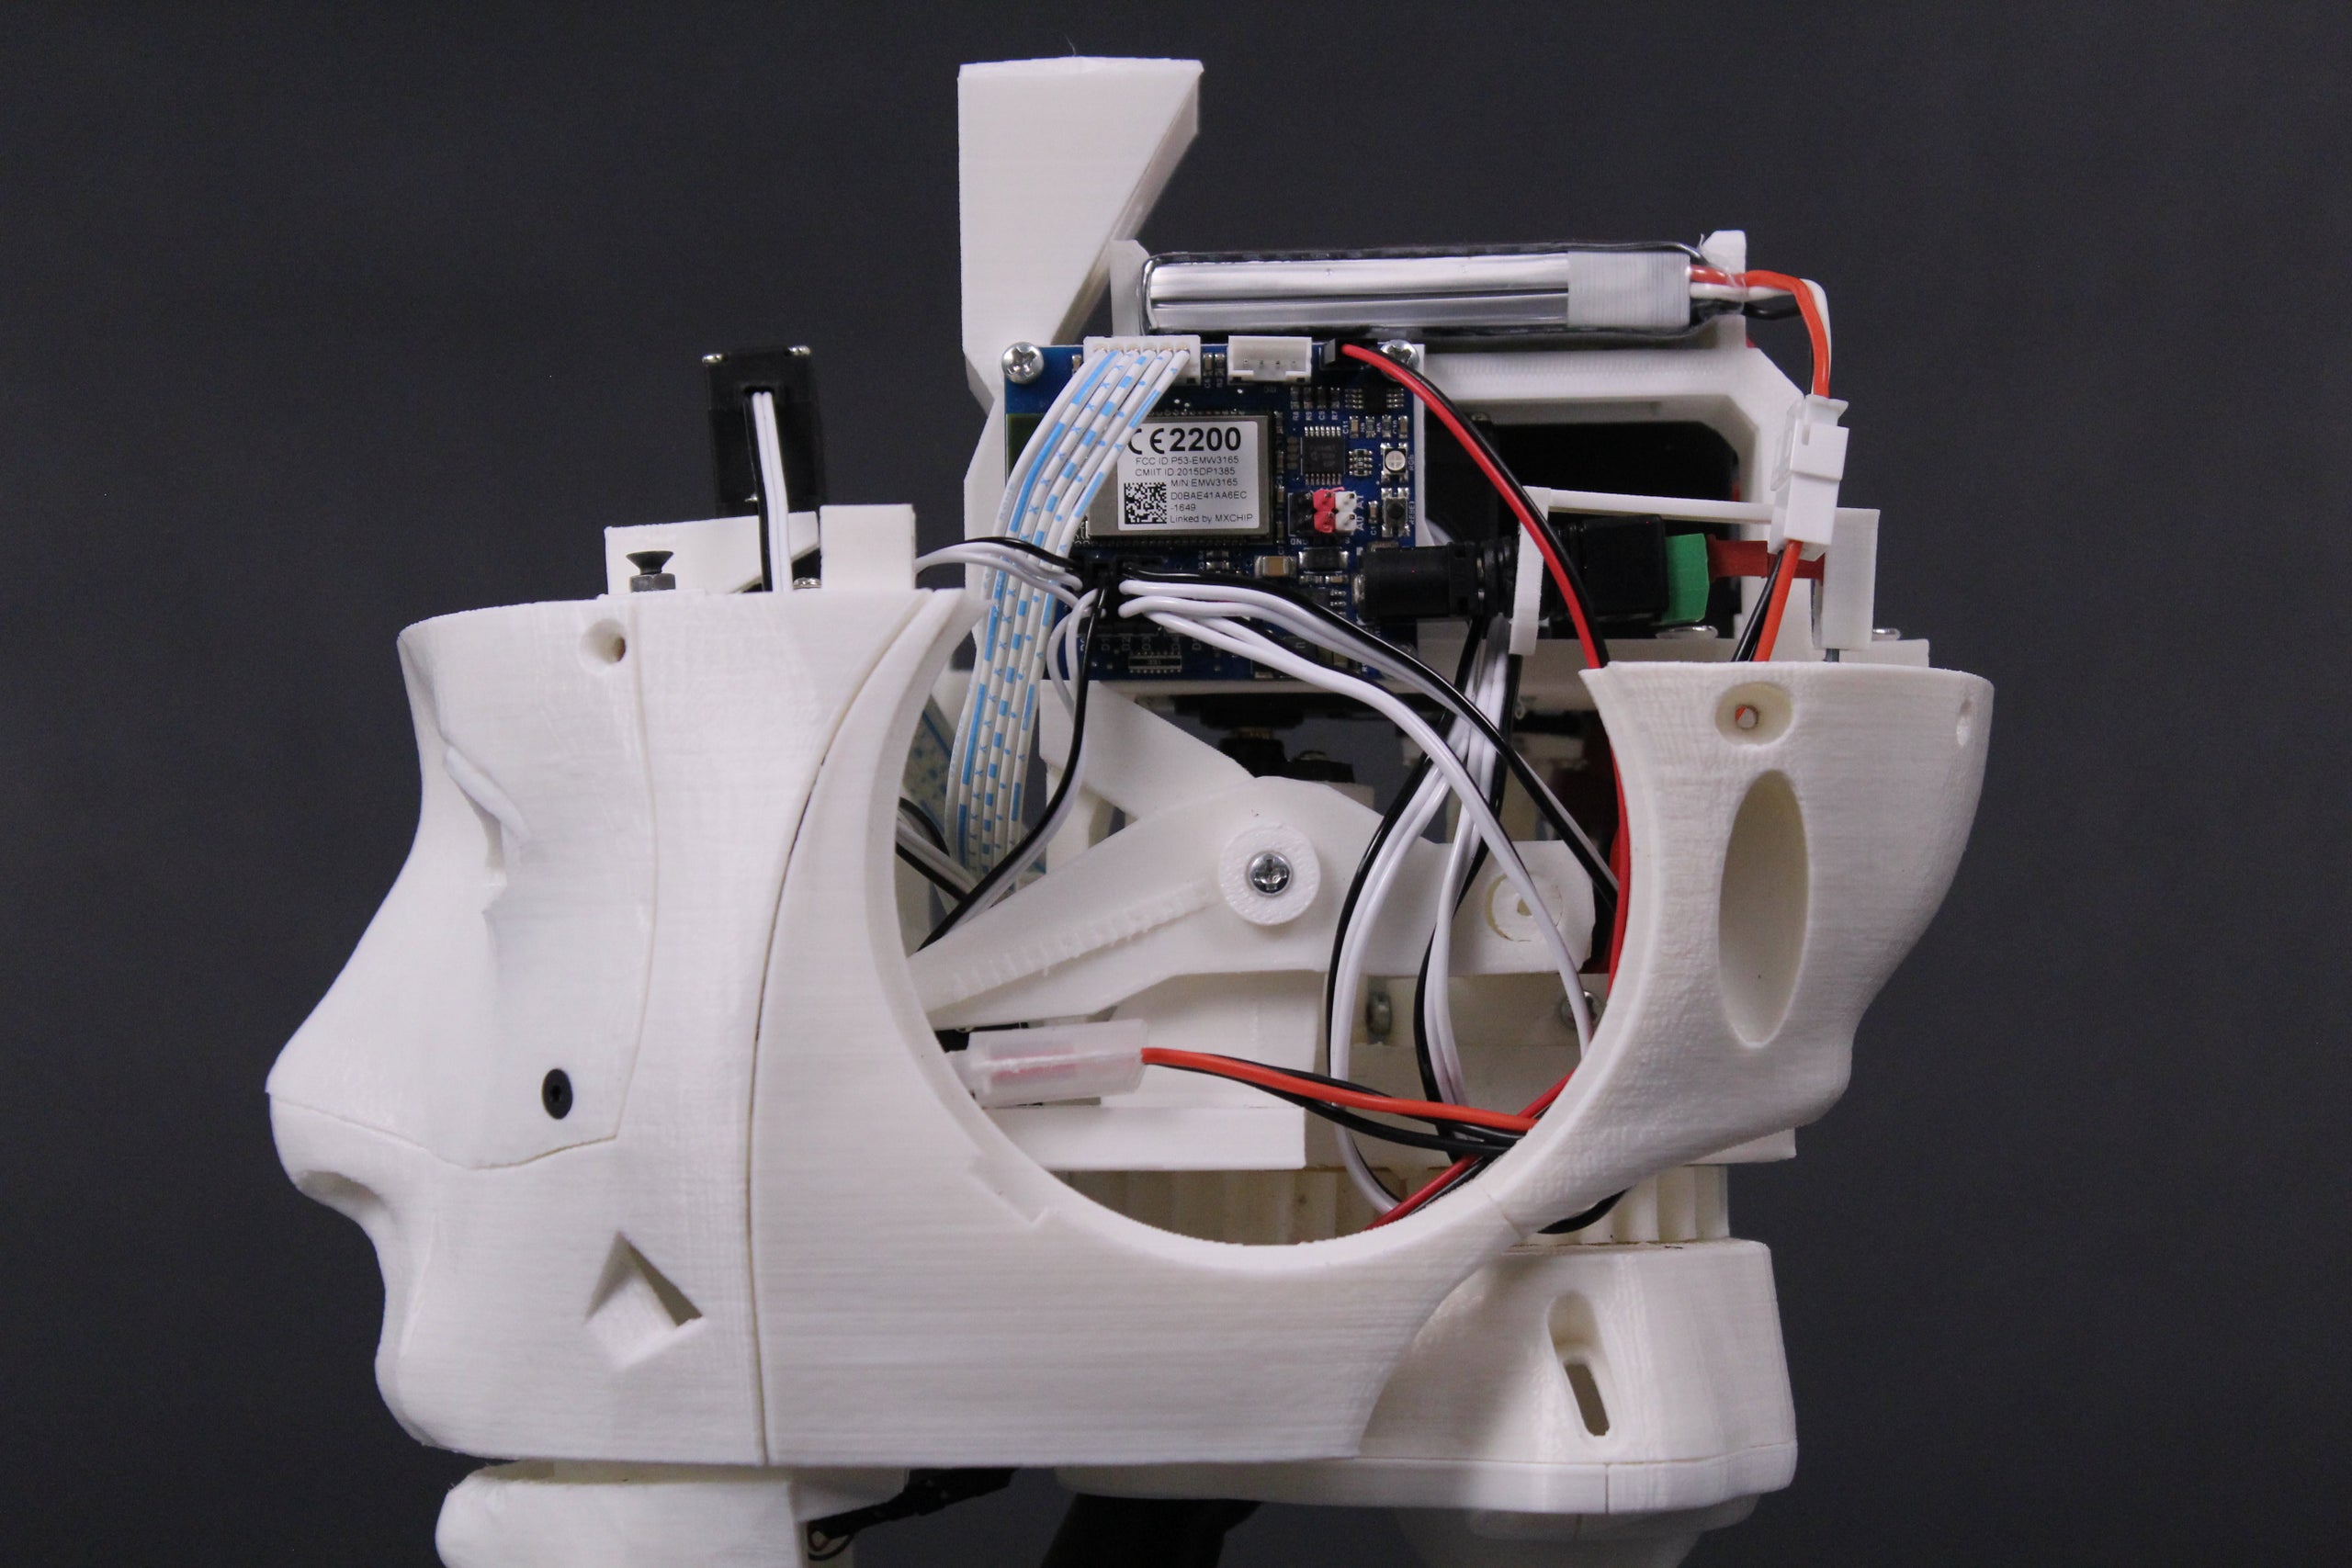 Programmable Robot Multi Pack for the Classroom